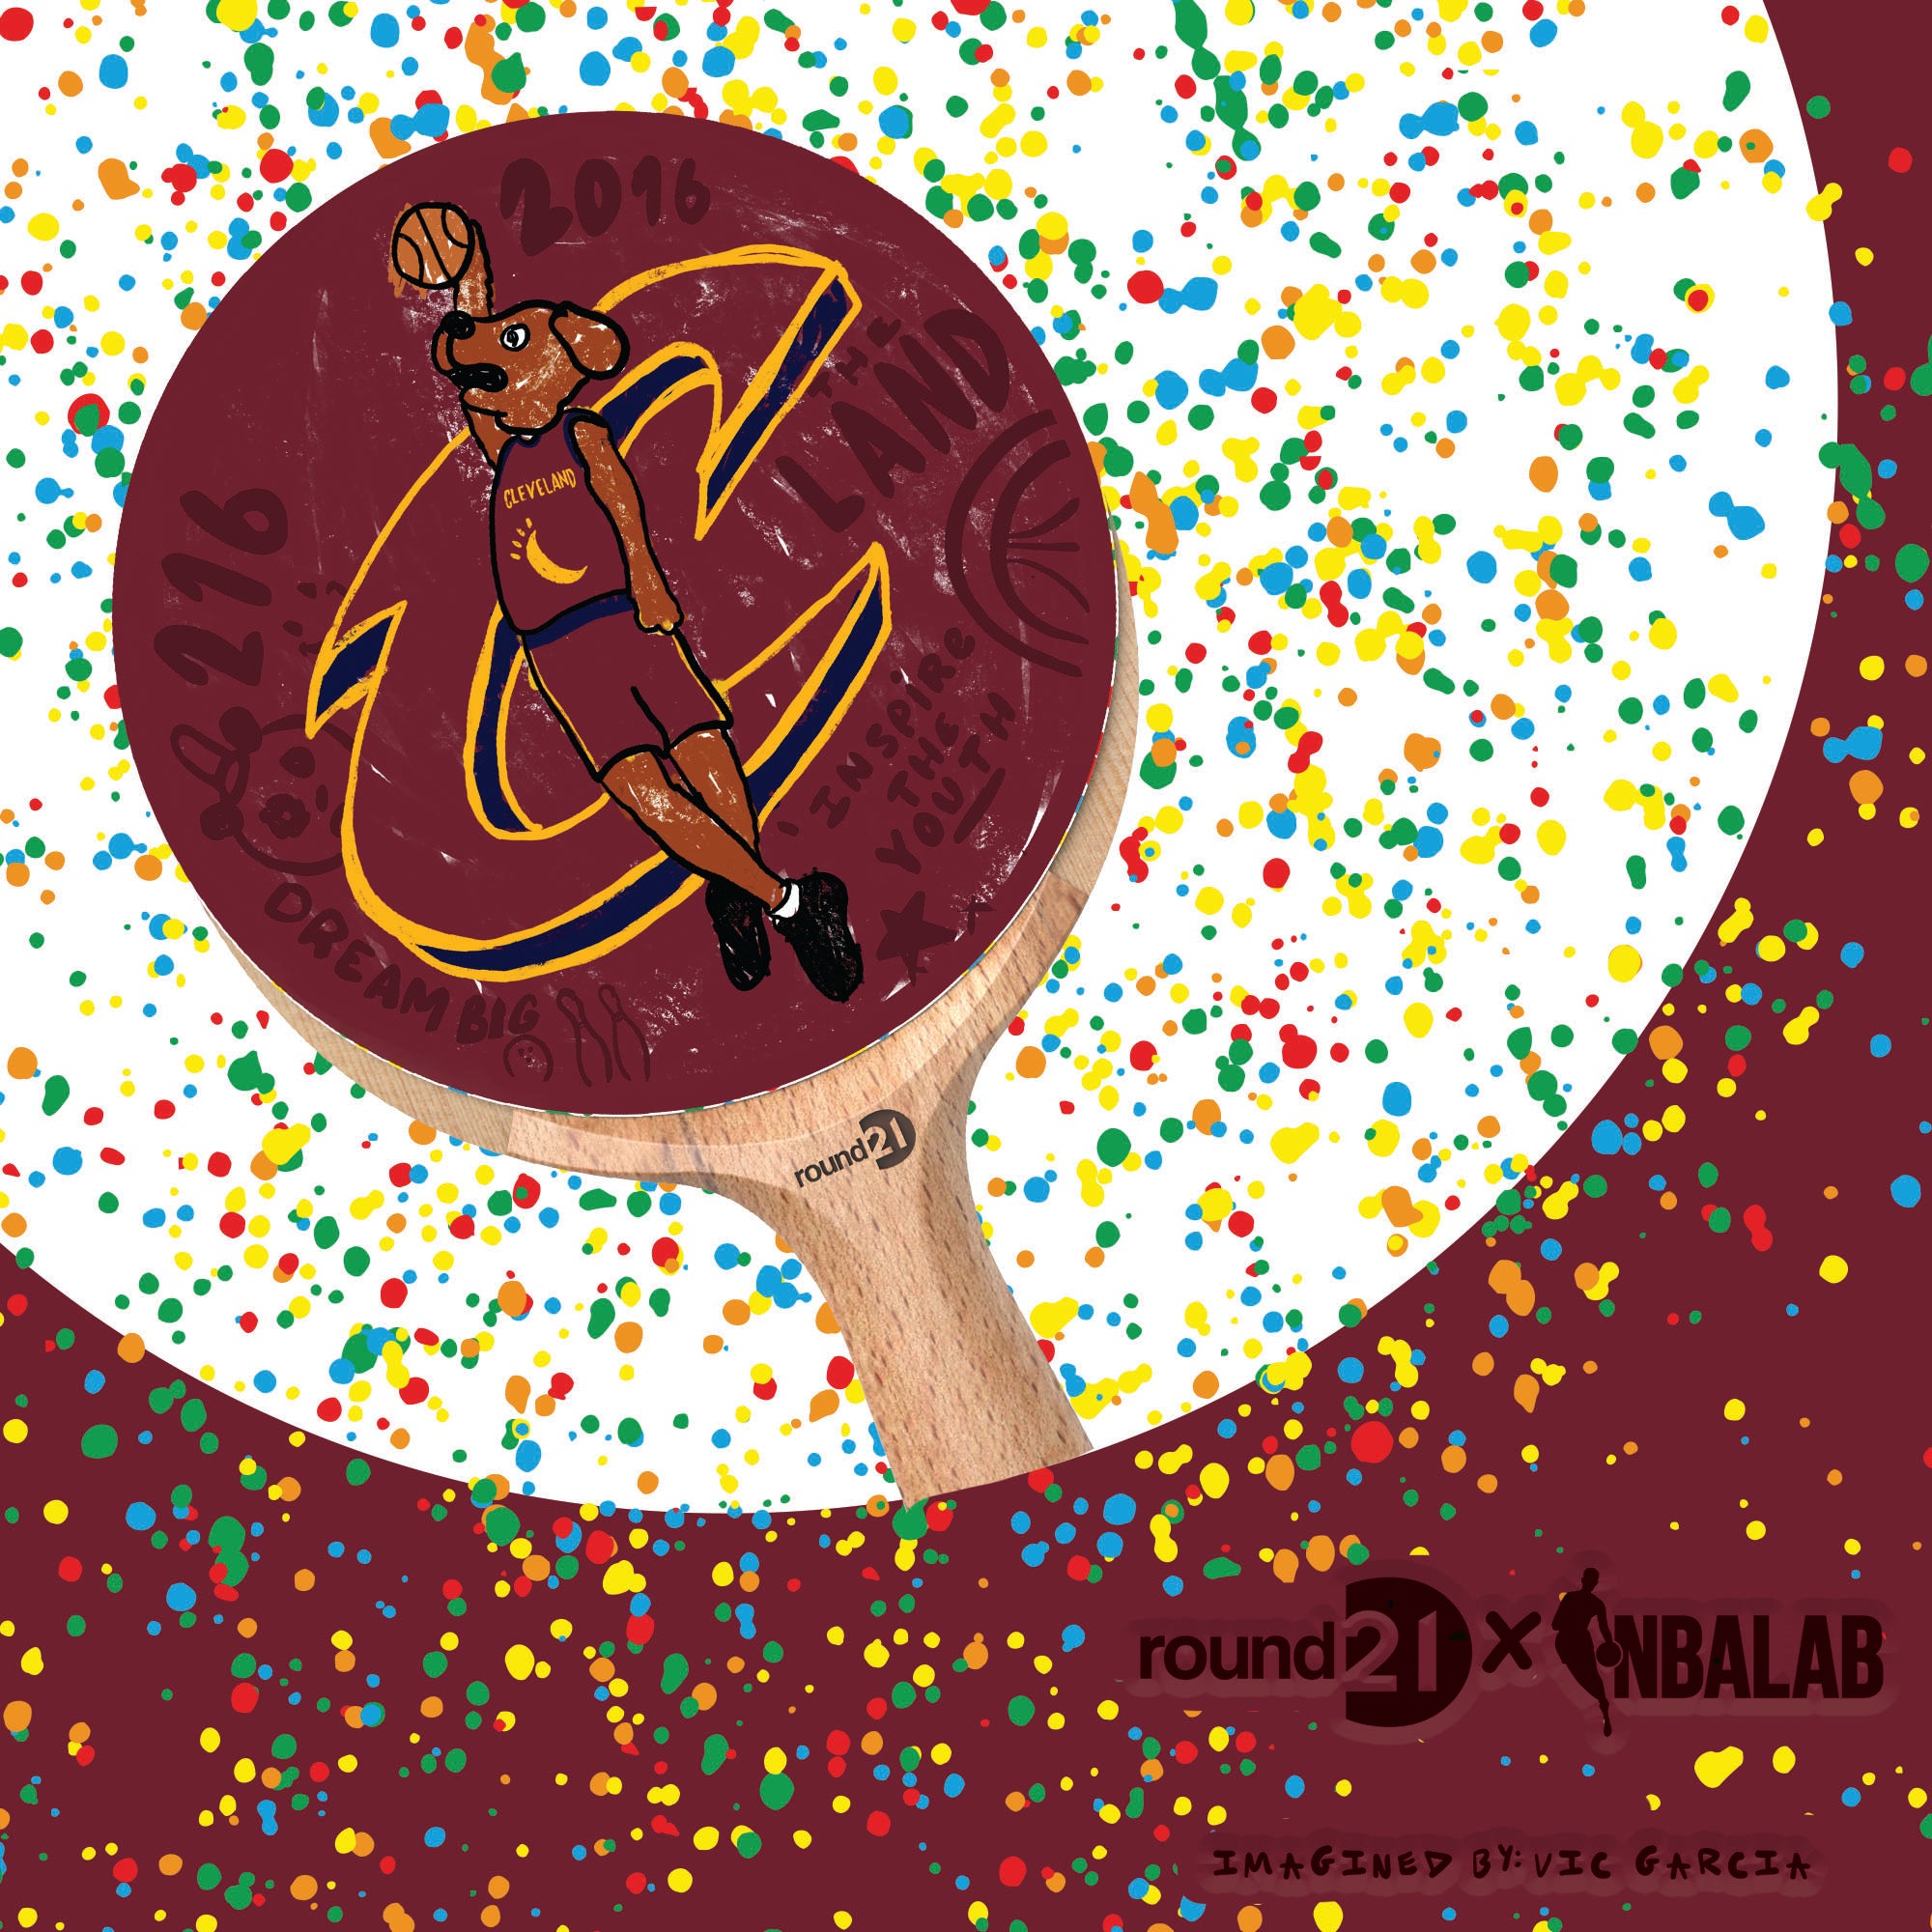 Cleveland Cavaliers paddle